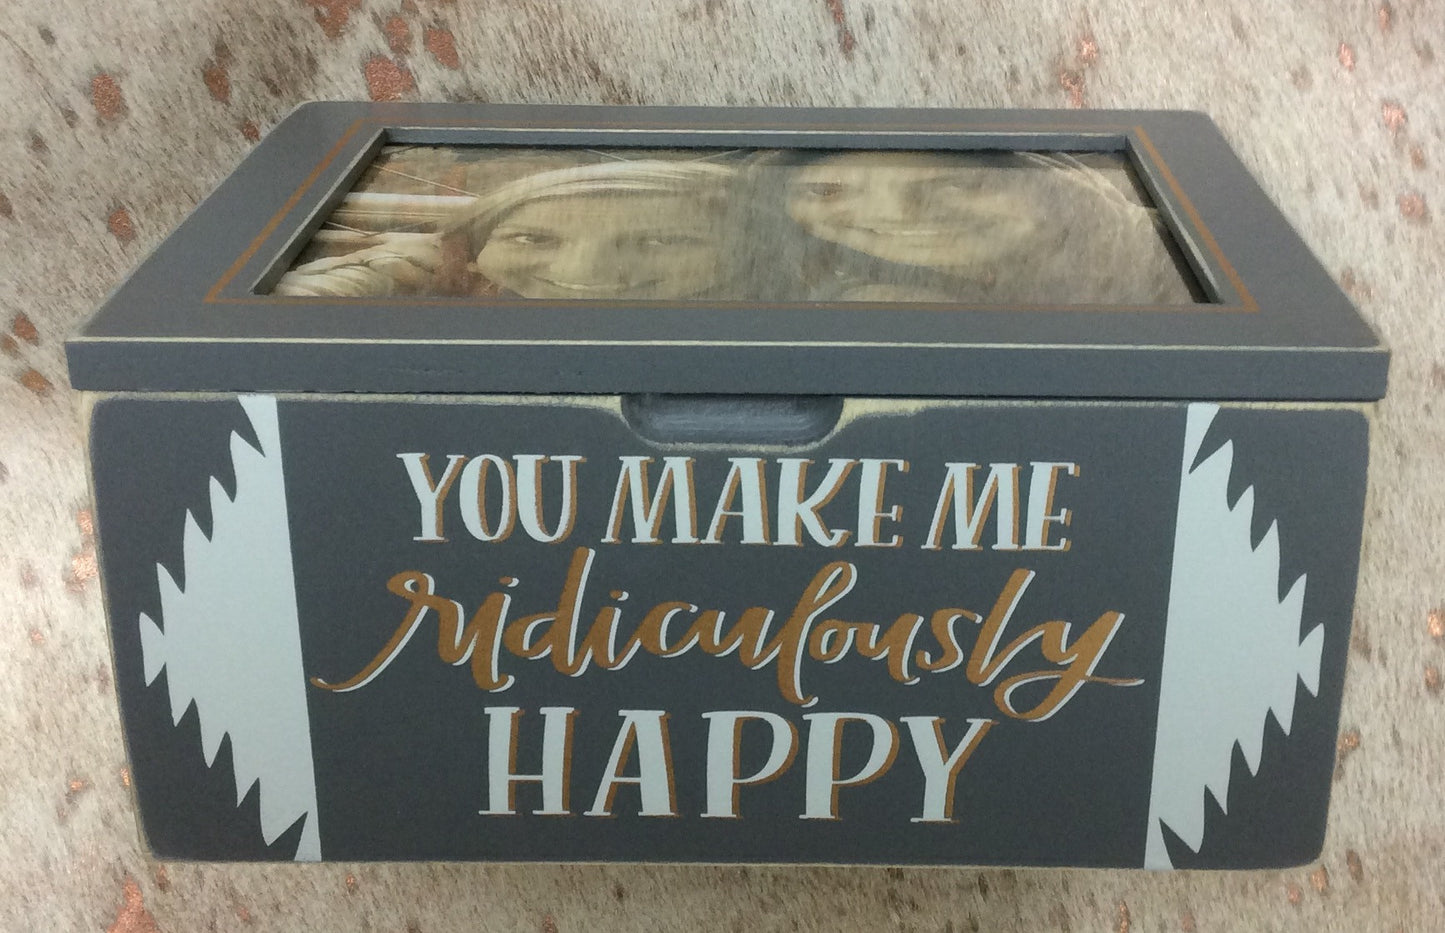 "RIDICULOUSLY HAPPY" PHOTO FRAME BOX